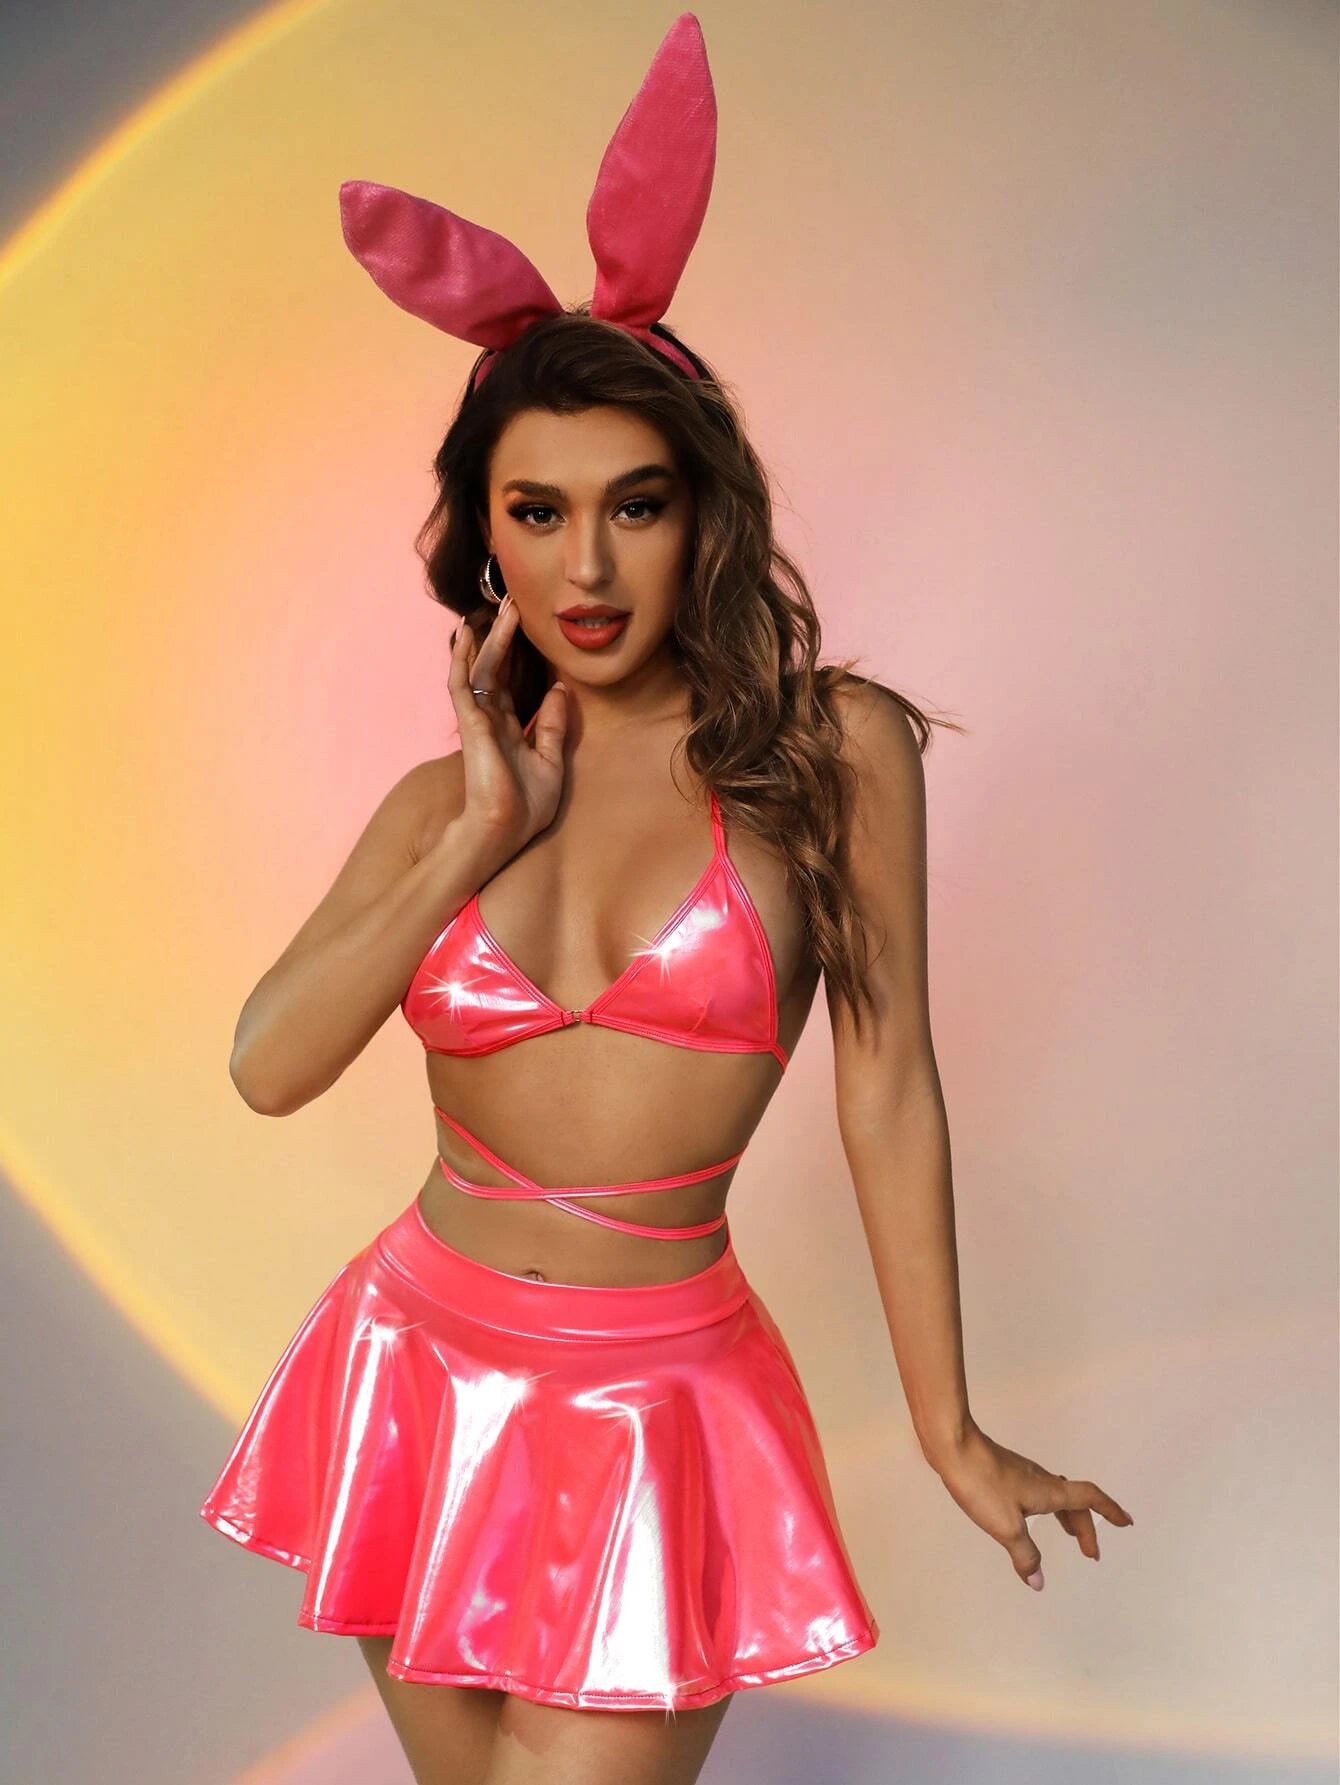 Sexy Bunny Cosplay Costume - This costume includes a pink, stretchy, and comfortable outfit, featuring a charming bunny ear headband. Perfect for playful and seductive moments, whether at parties or for intimate evenings with your partner. Hand wash for easy care. Discreet packaging included. Add excitement to your life with this enchanting bunny costume.